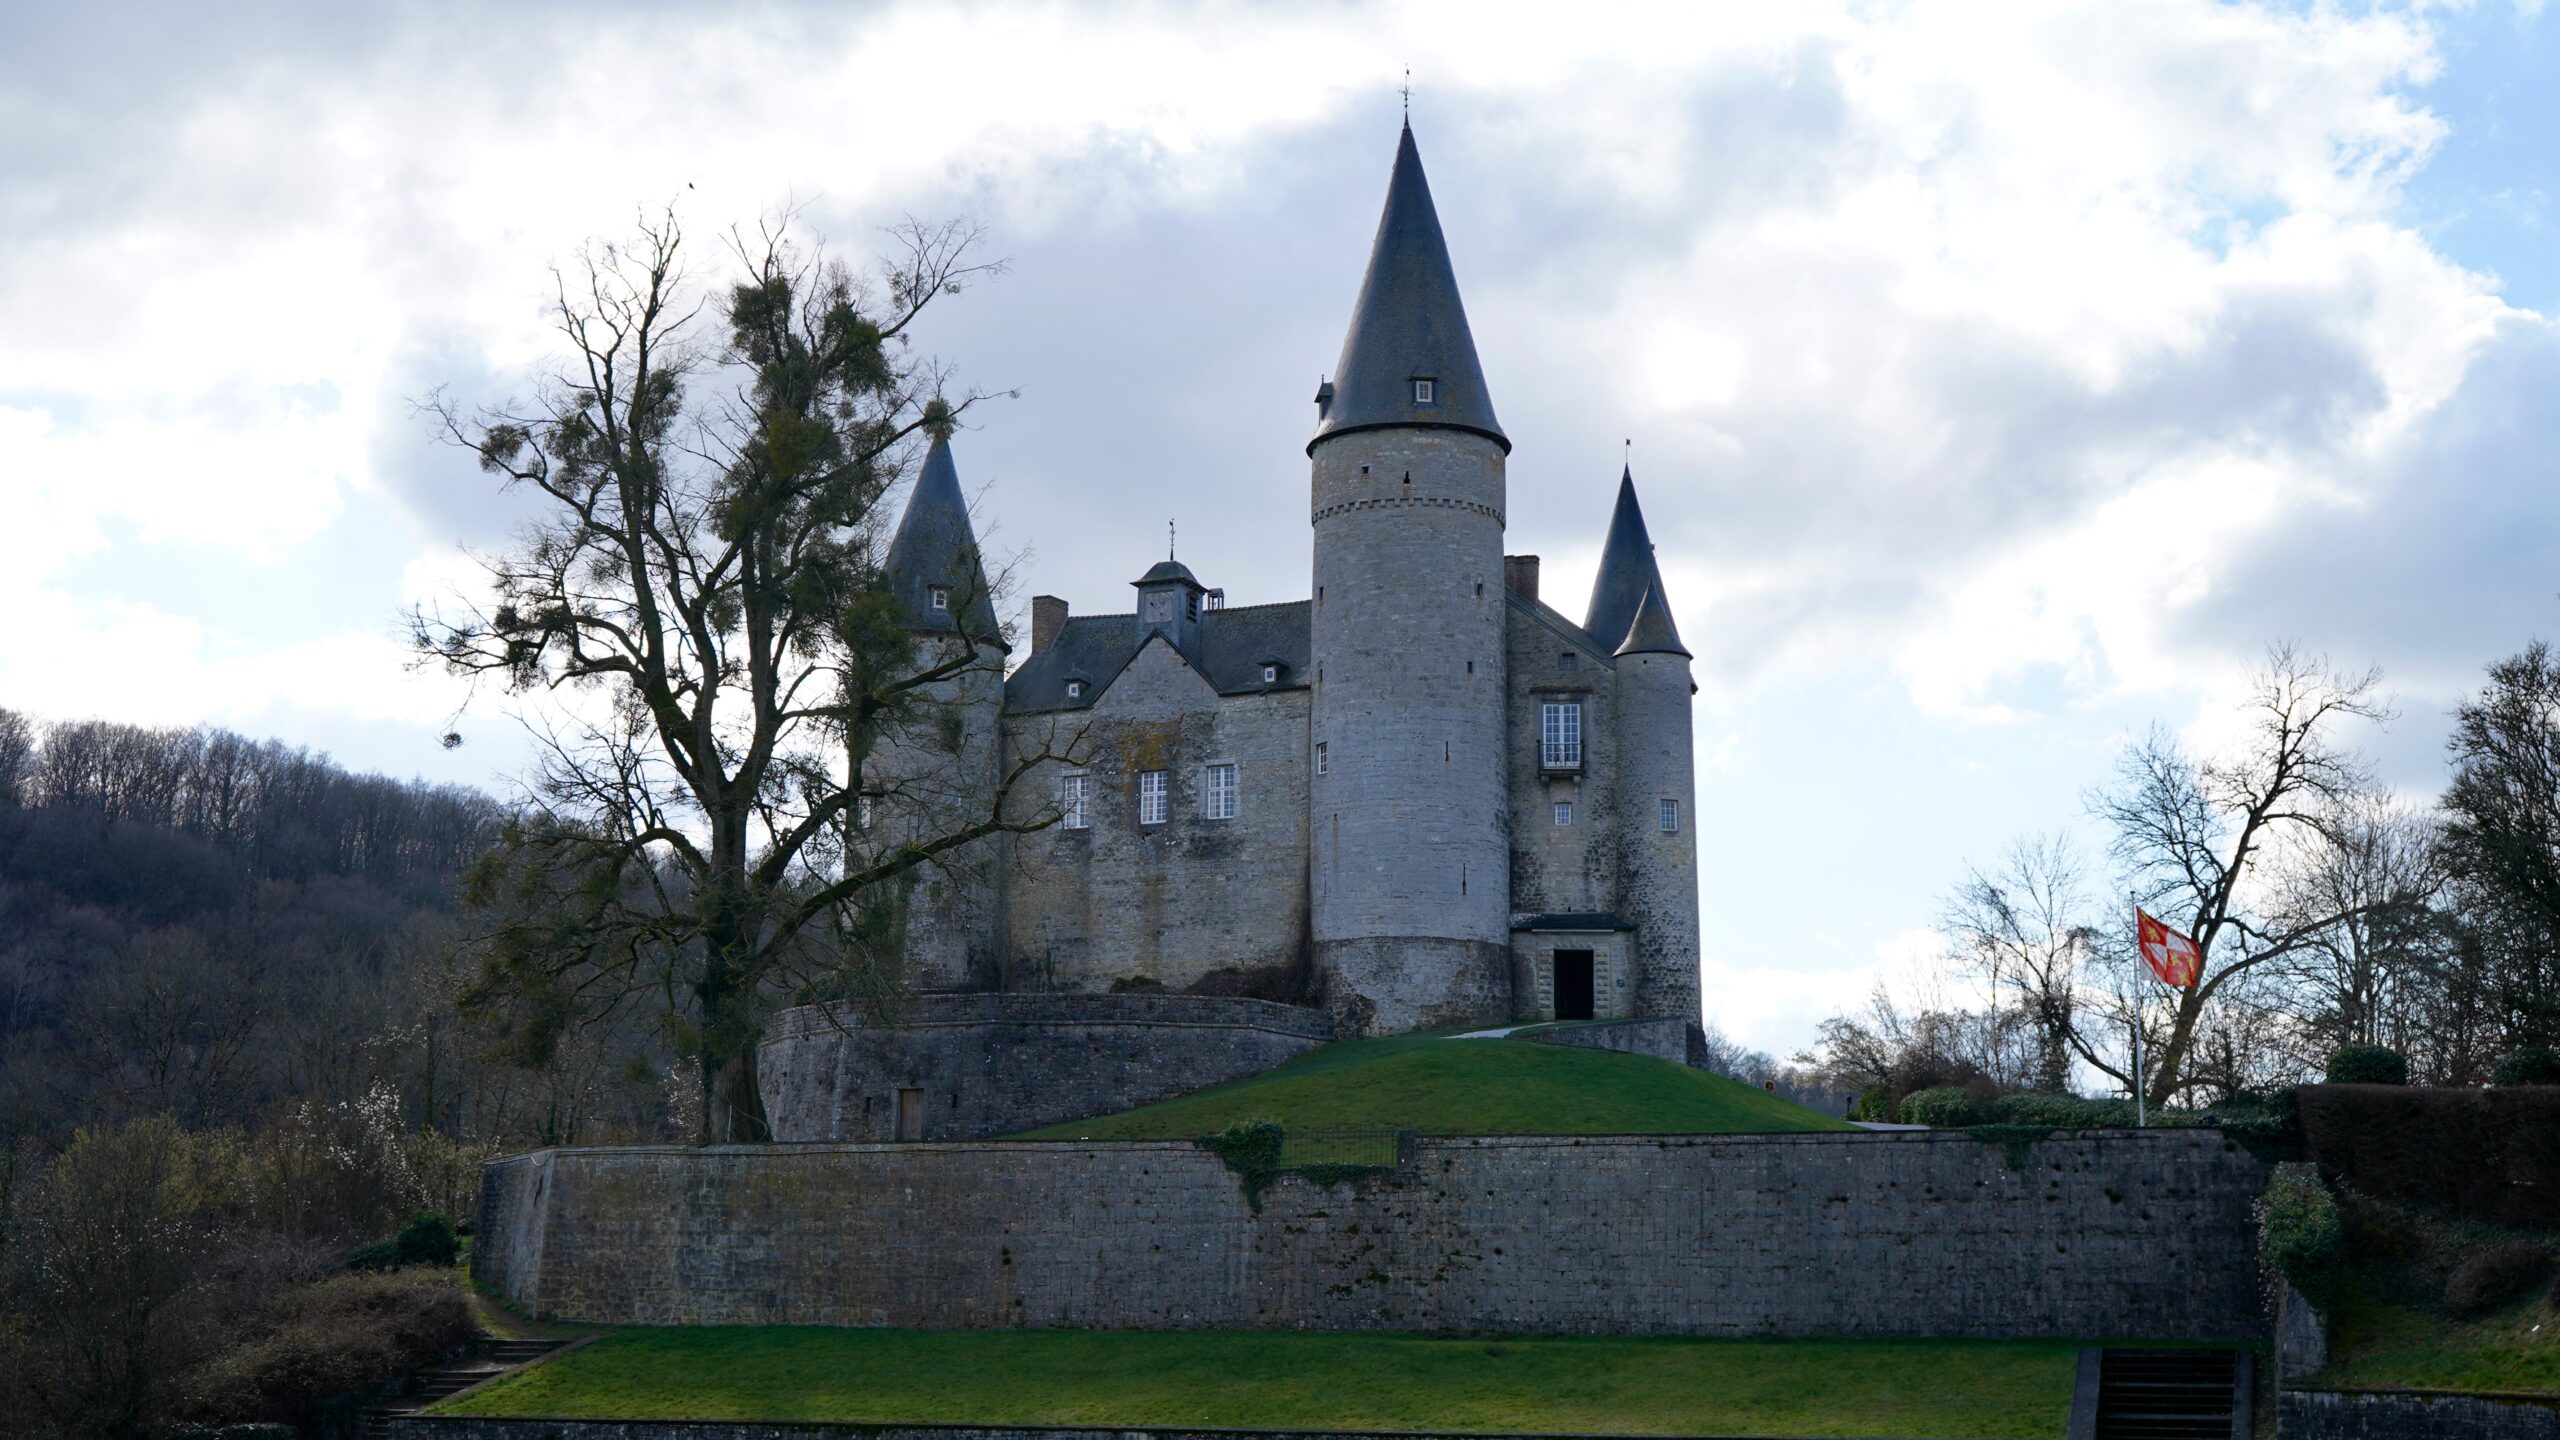 veves castle on a small hill with spires on each side and grey stone